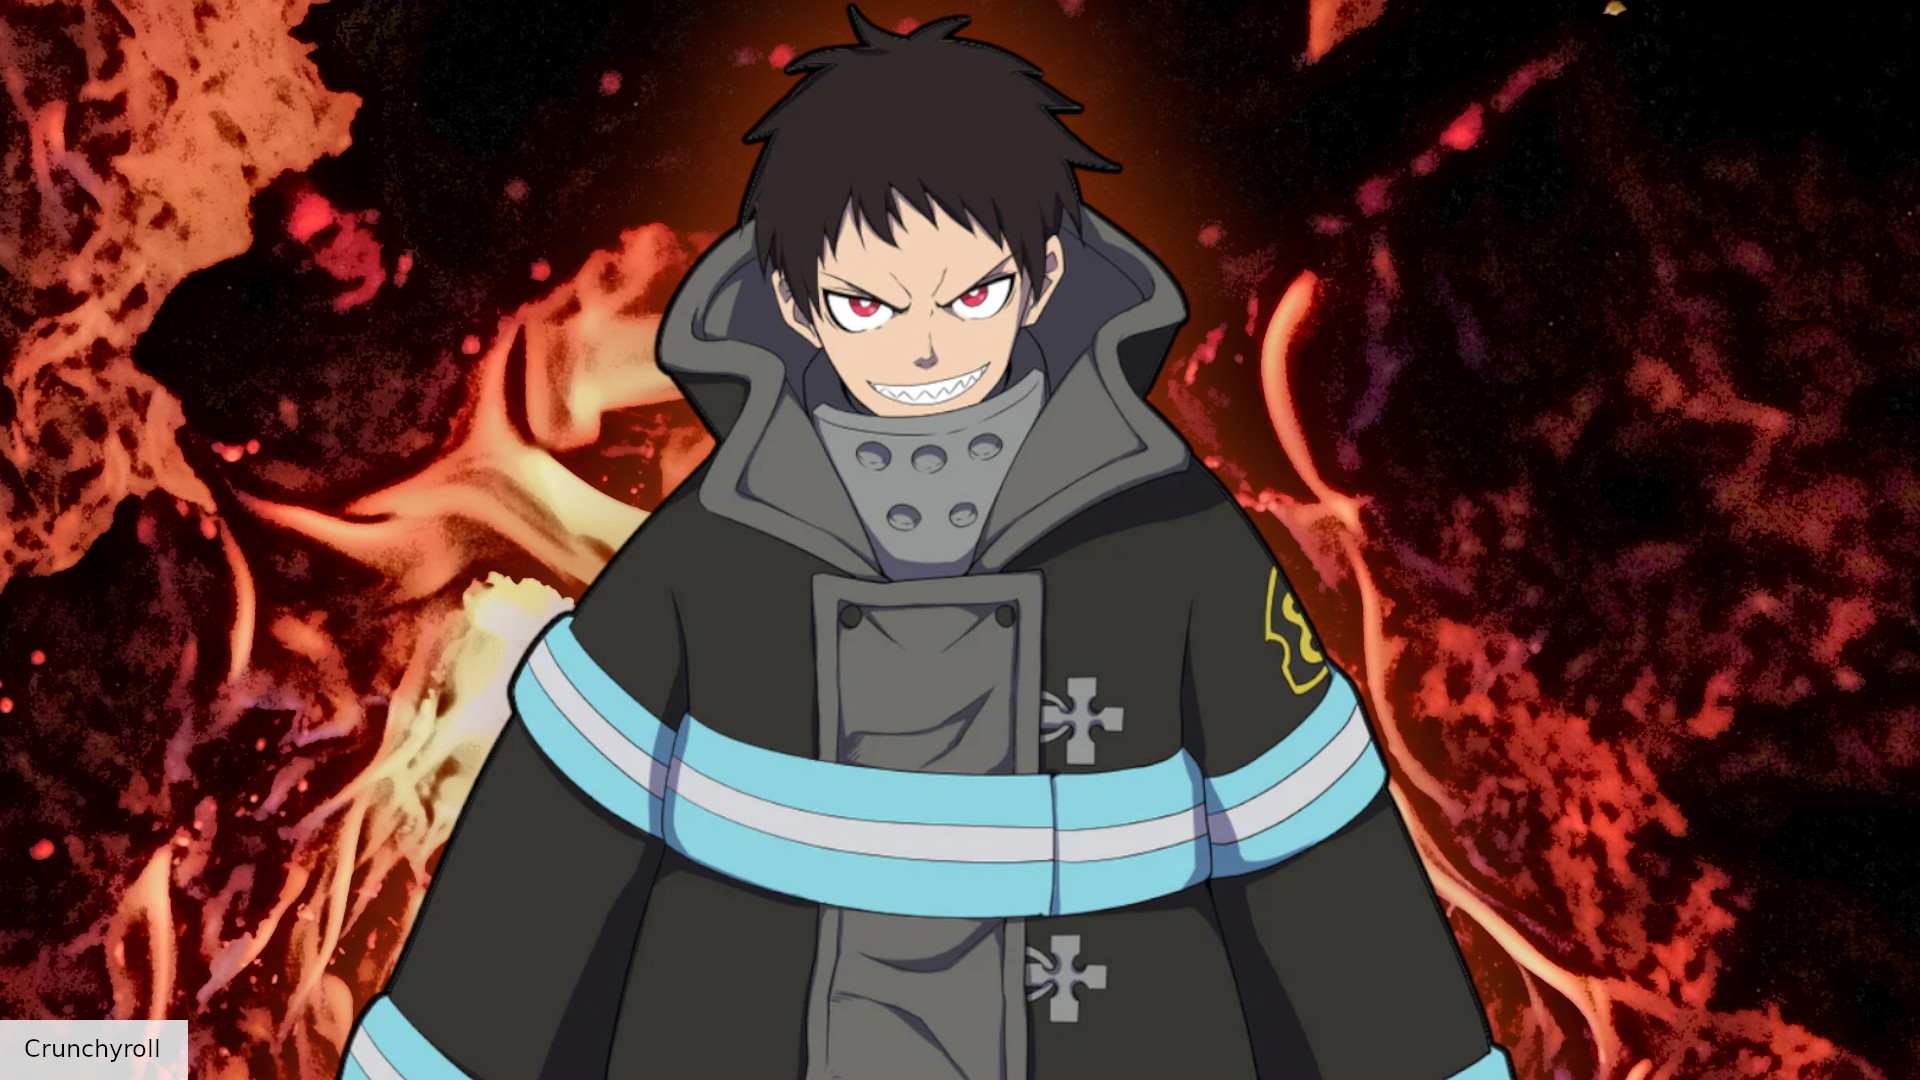 Fire Force season 3 potential release date, cast, plot and everything you  need to know